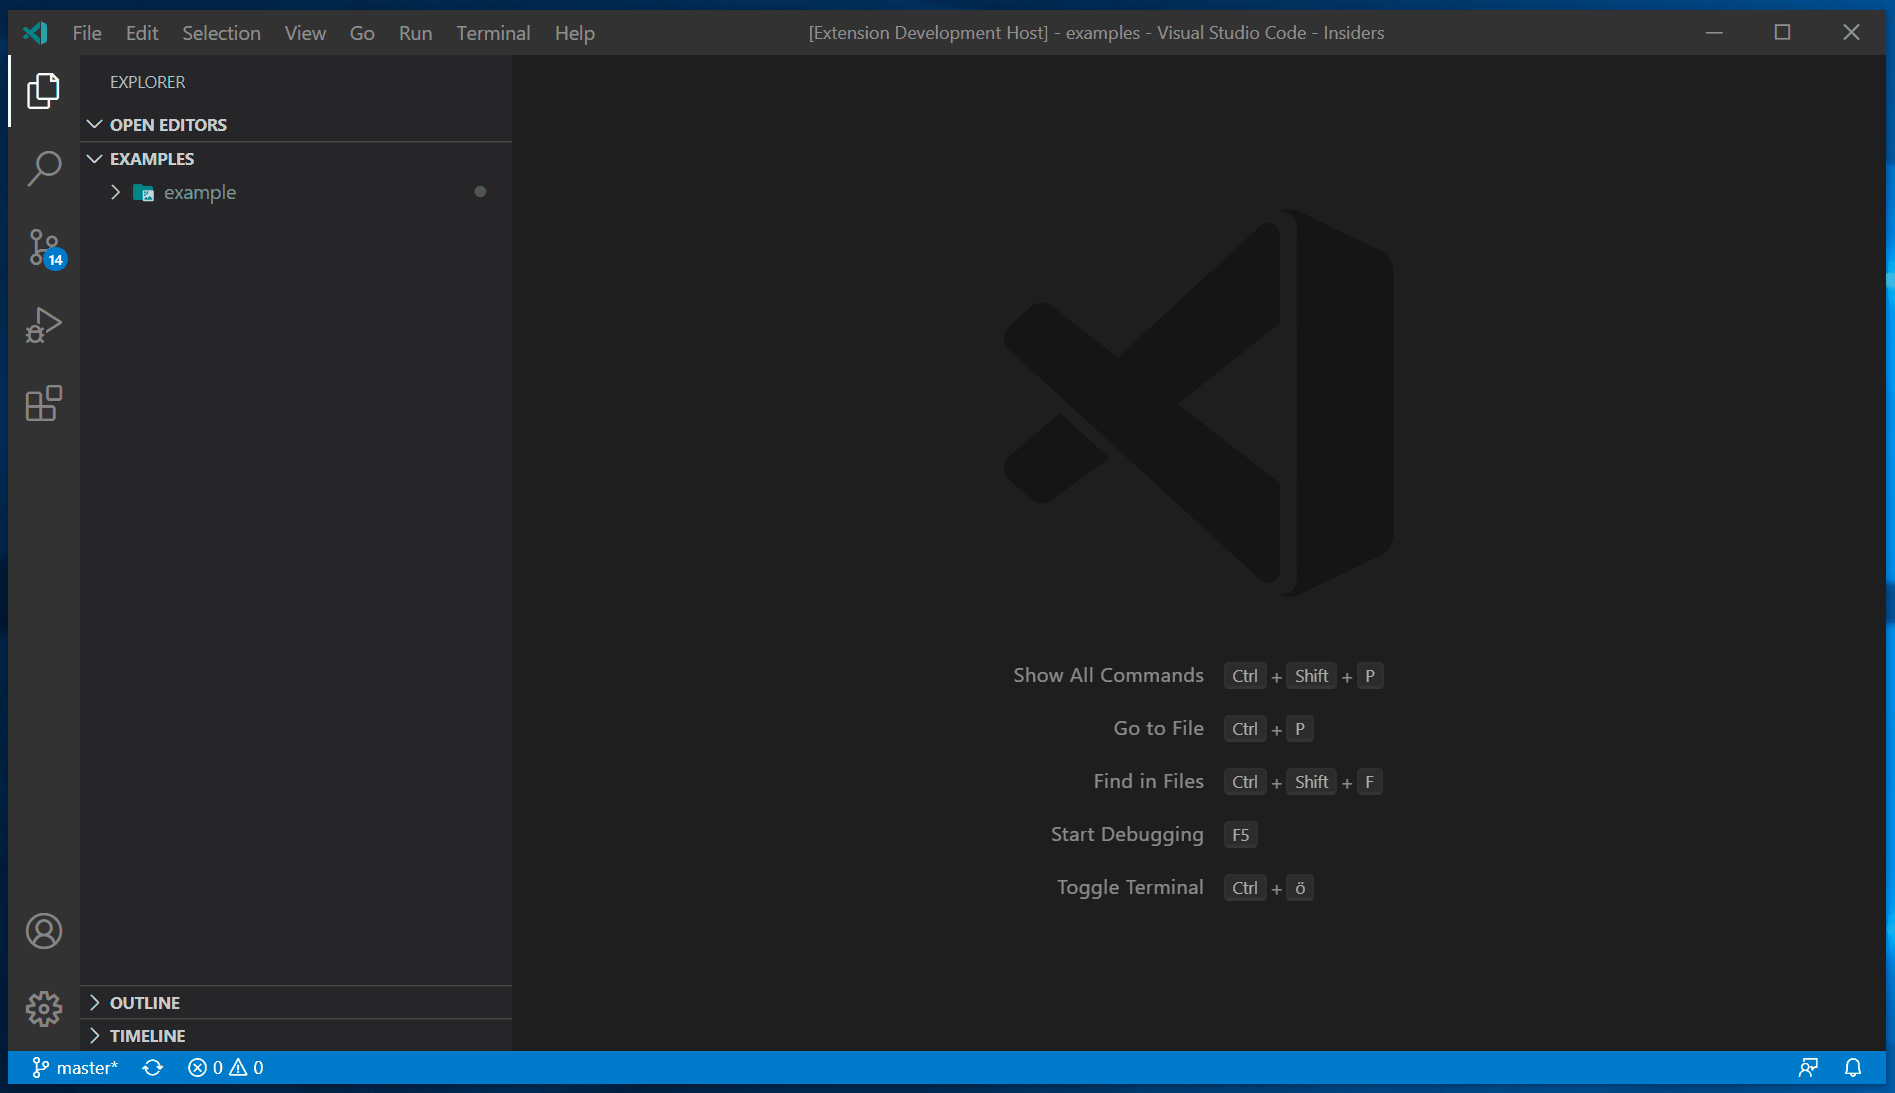 An extension that integrates Draw.io into VS Code